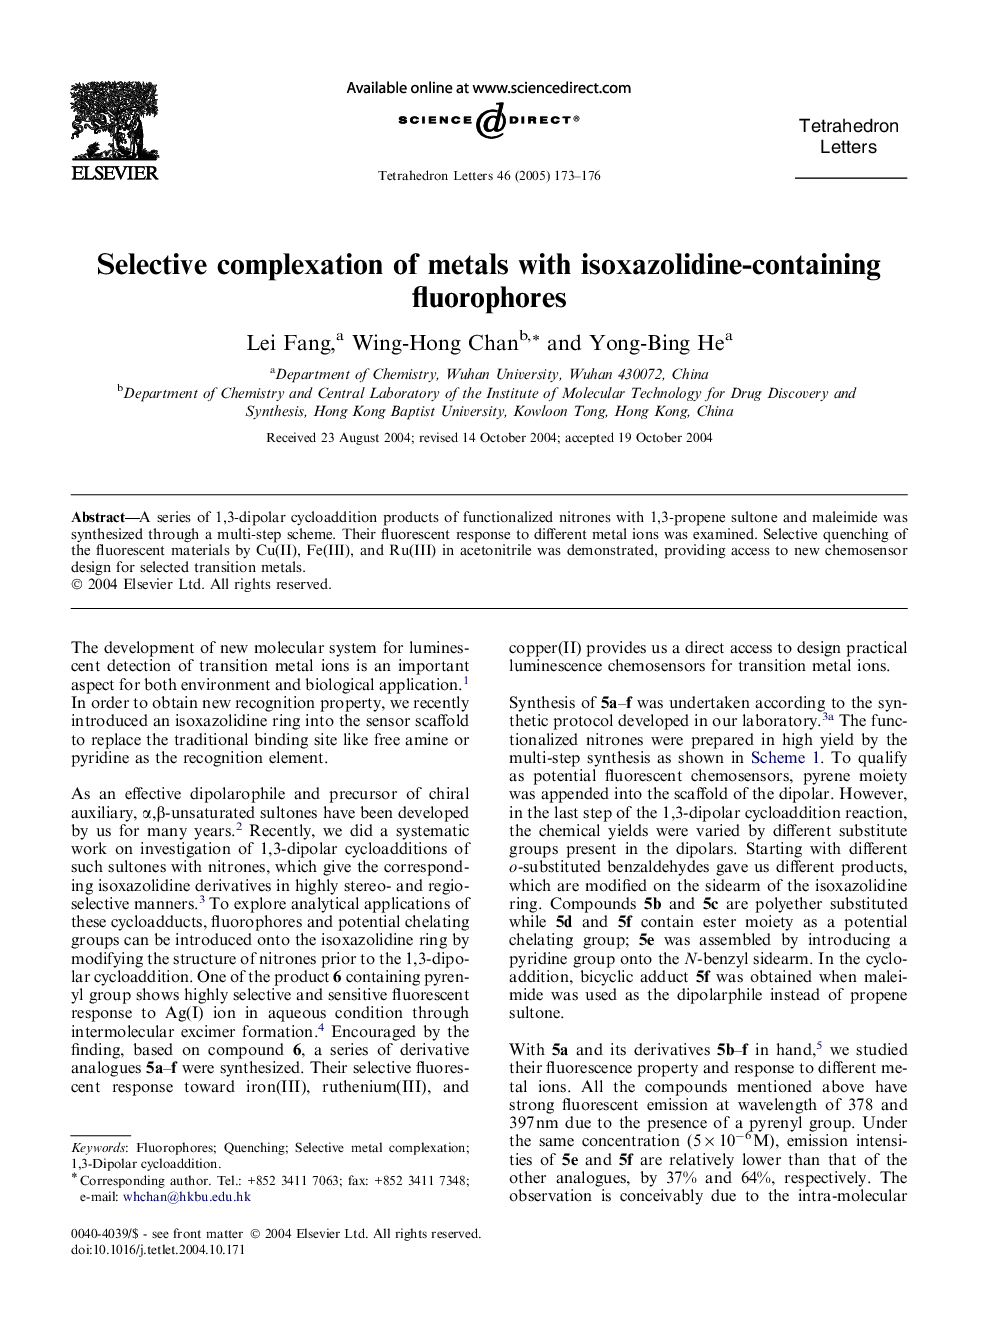 Selective complexation of metals with isoxazolidine-containing fluorophores